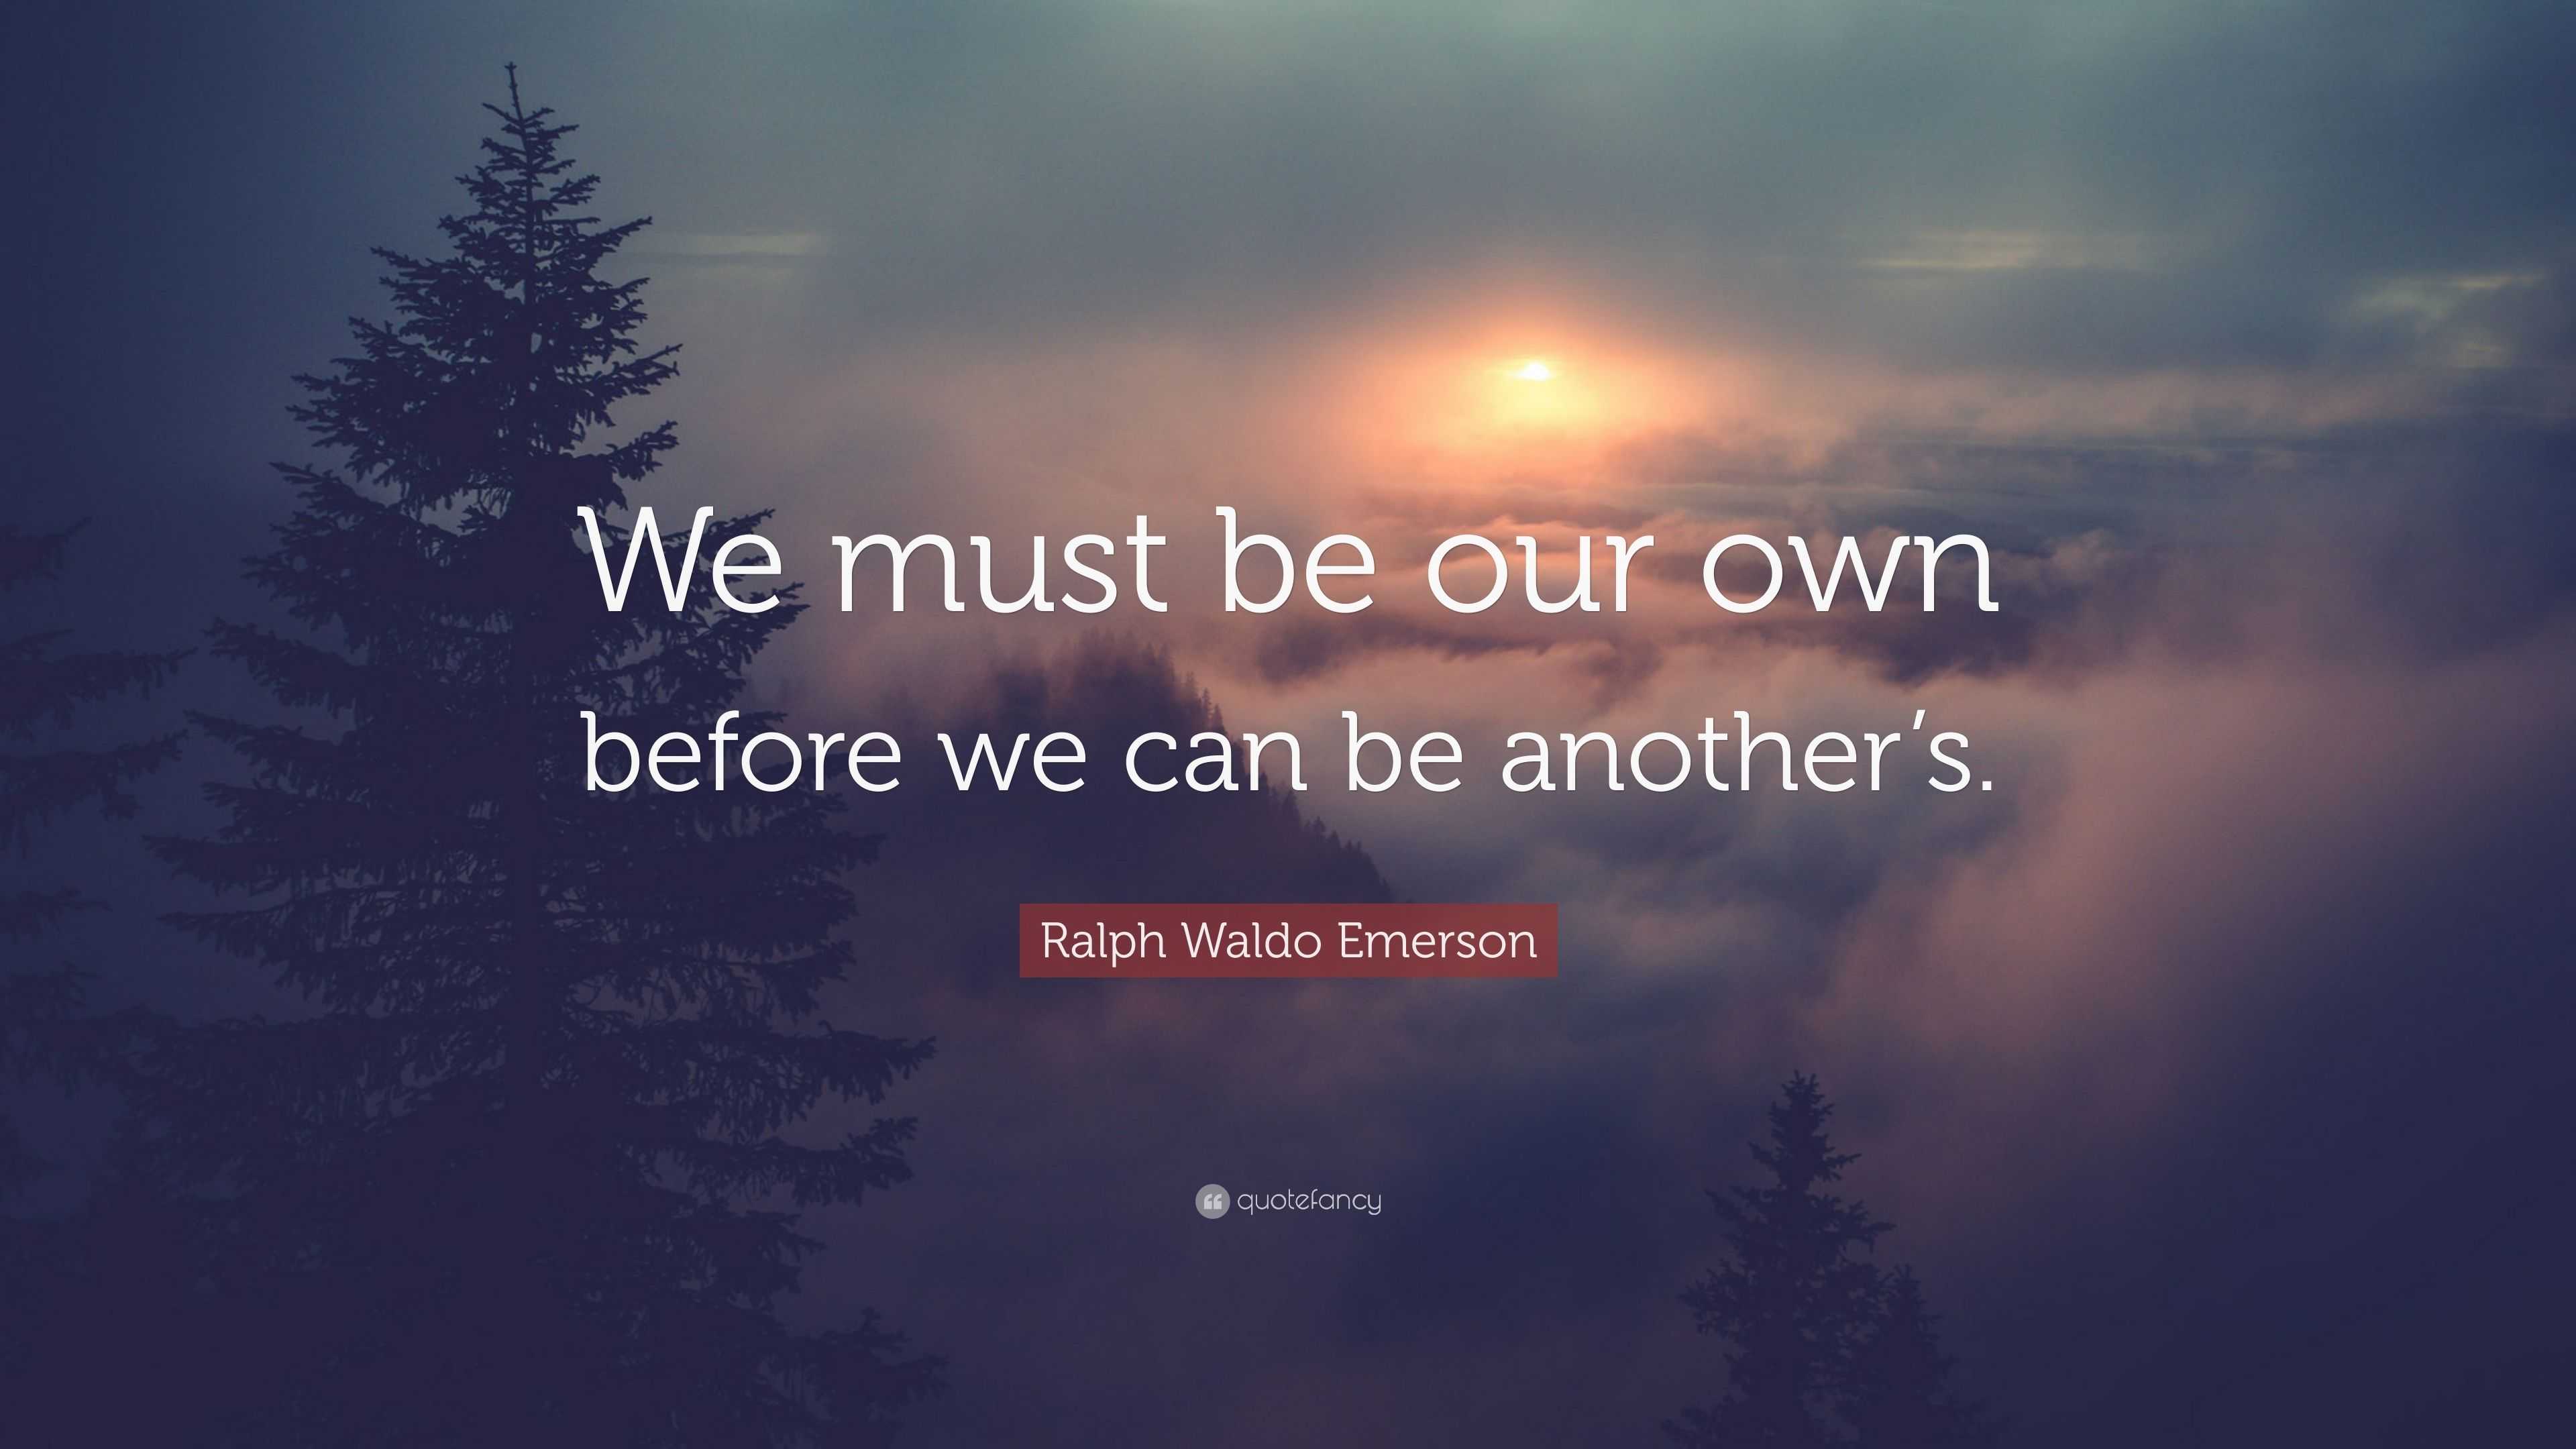 https://quotefancy.com/media/wallpaper/3840x2160/5031824-Ralph-Waldo-Emerson-Quote-We-must-be-our-own-before-we-can-be.jpg